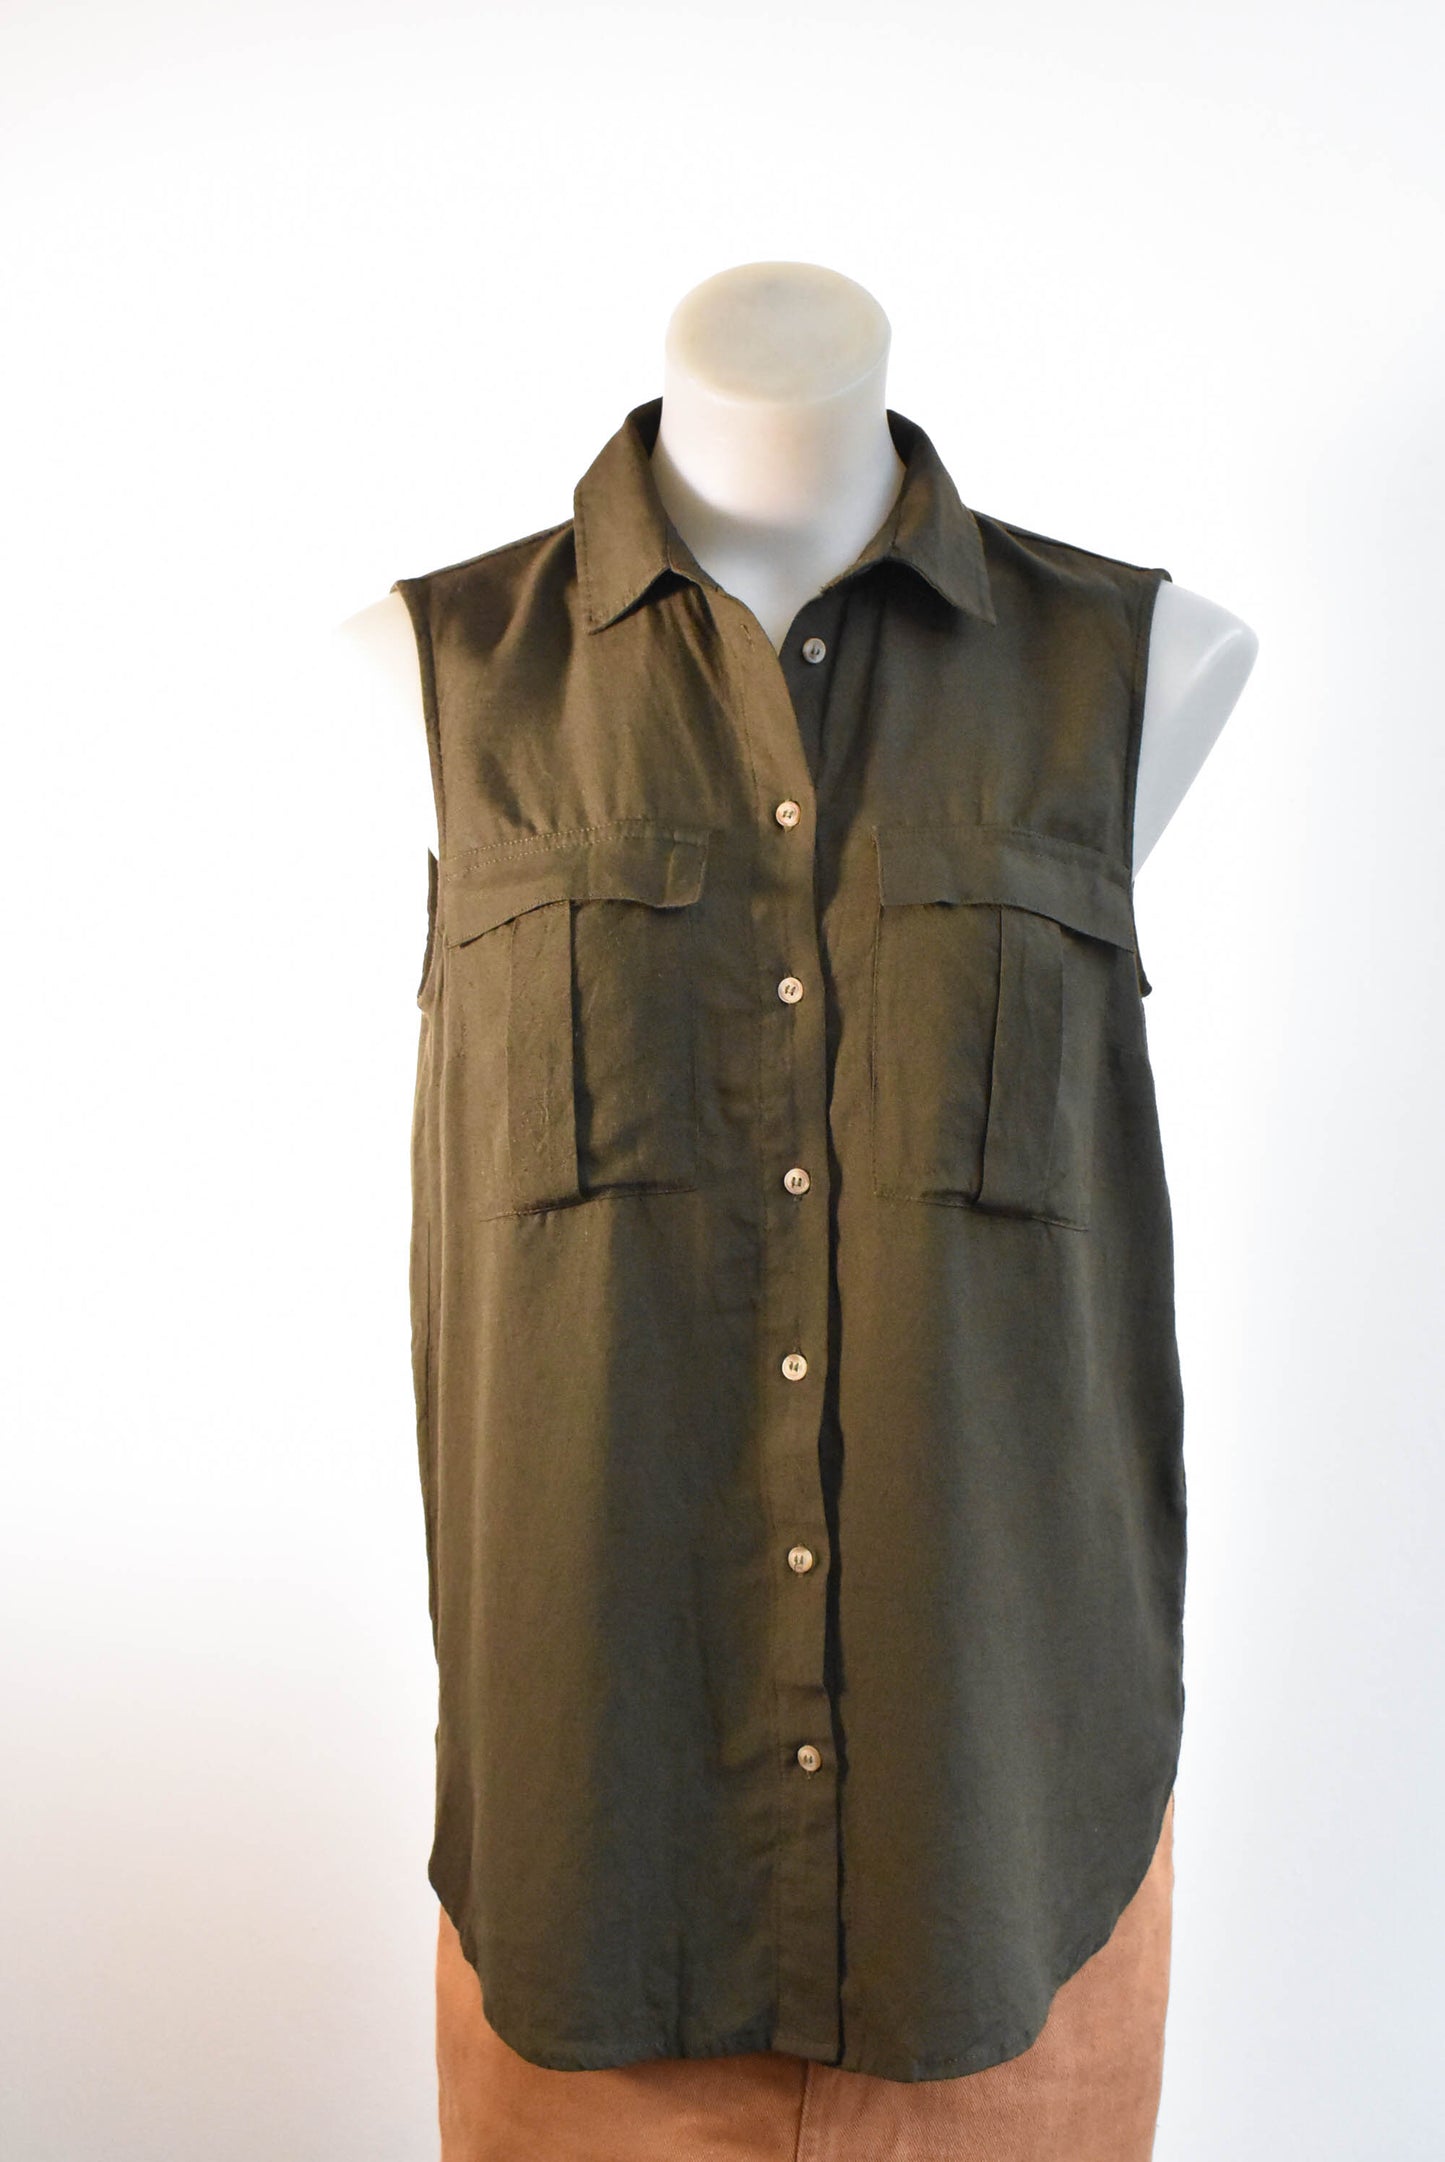 H&M Forest Green Button Up Singlet, size 6